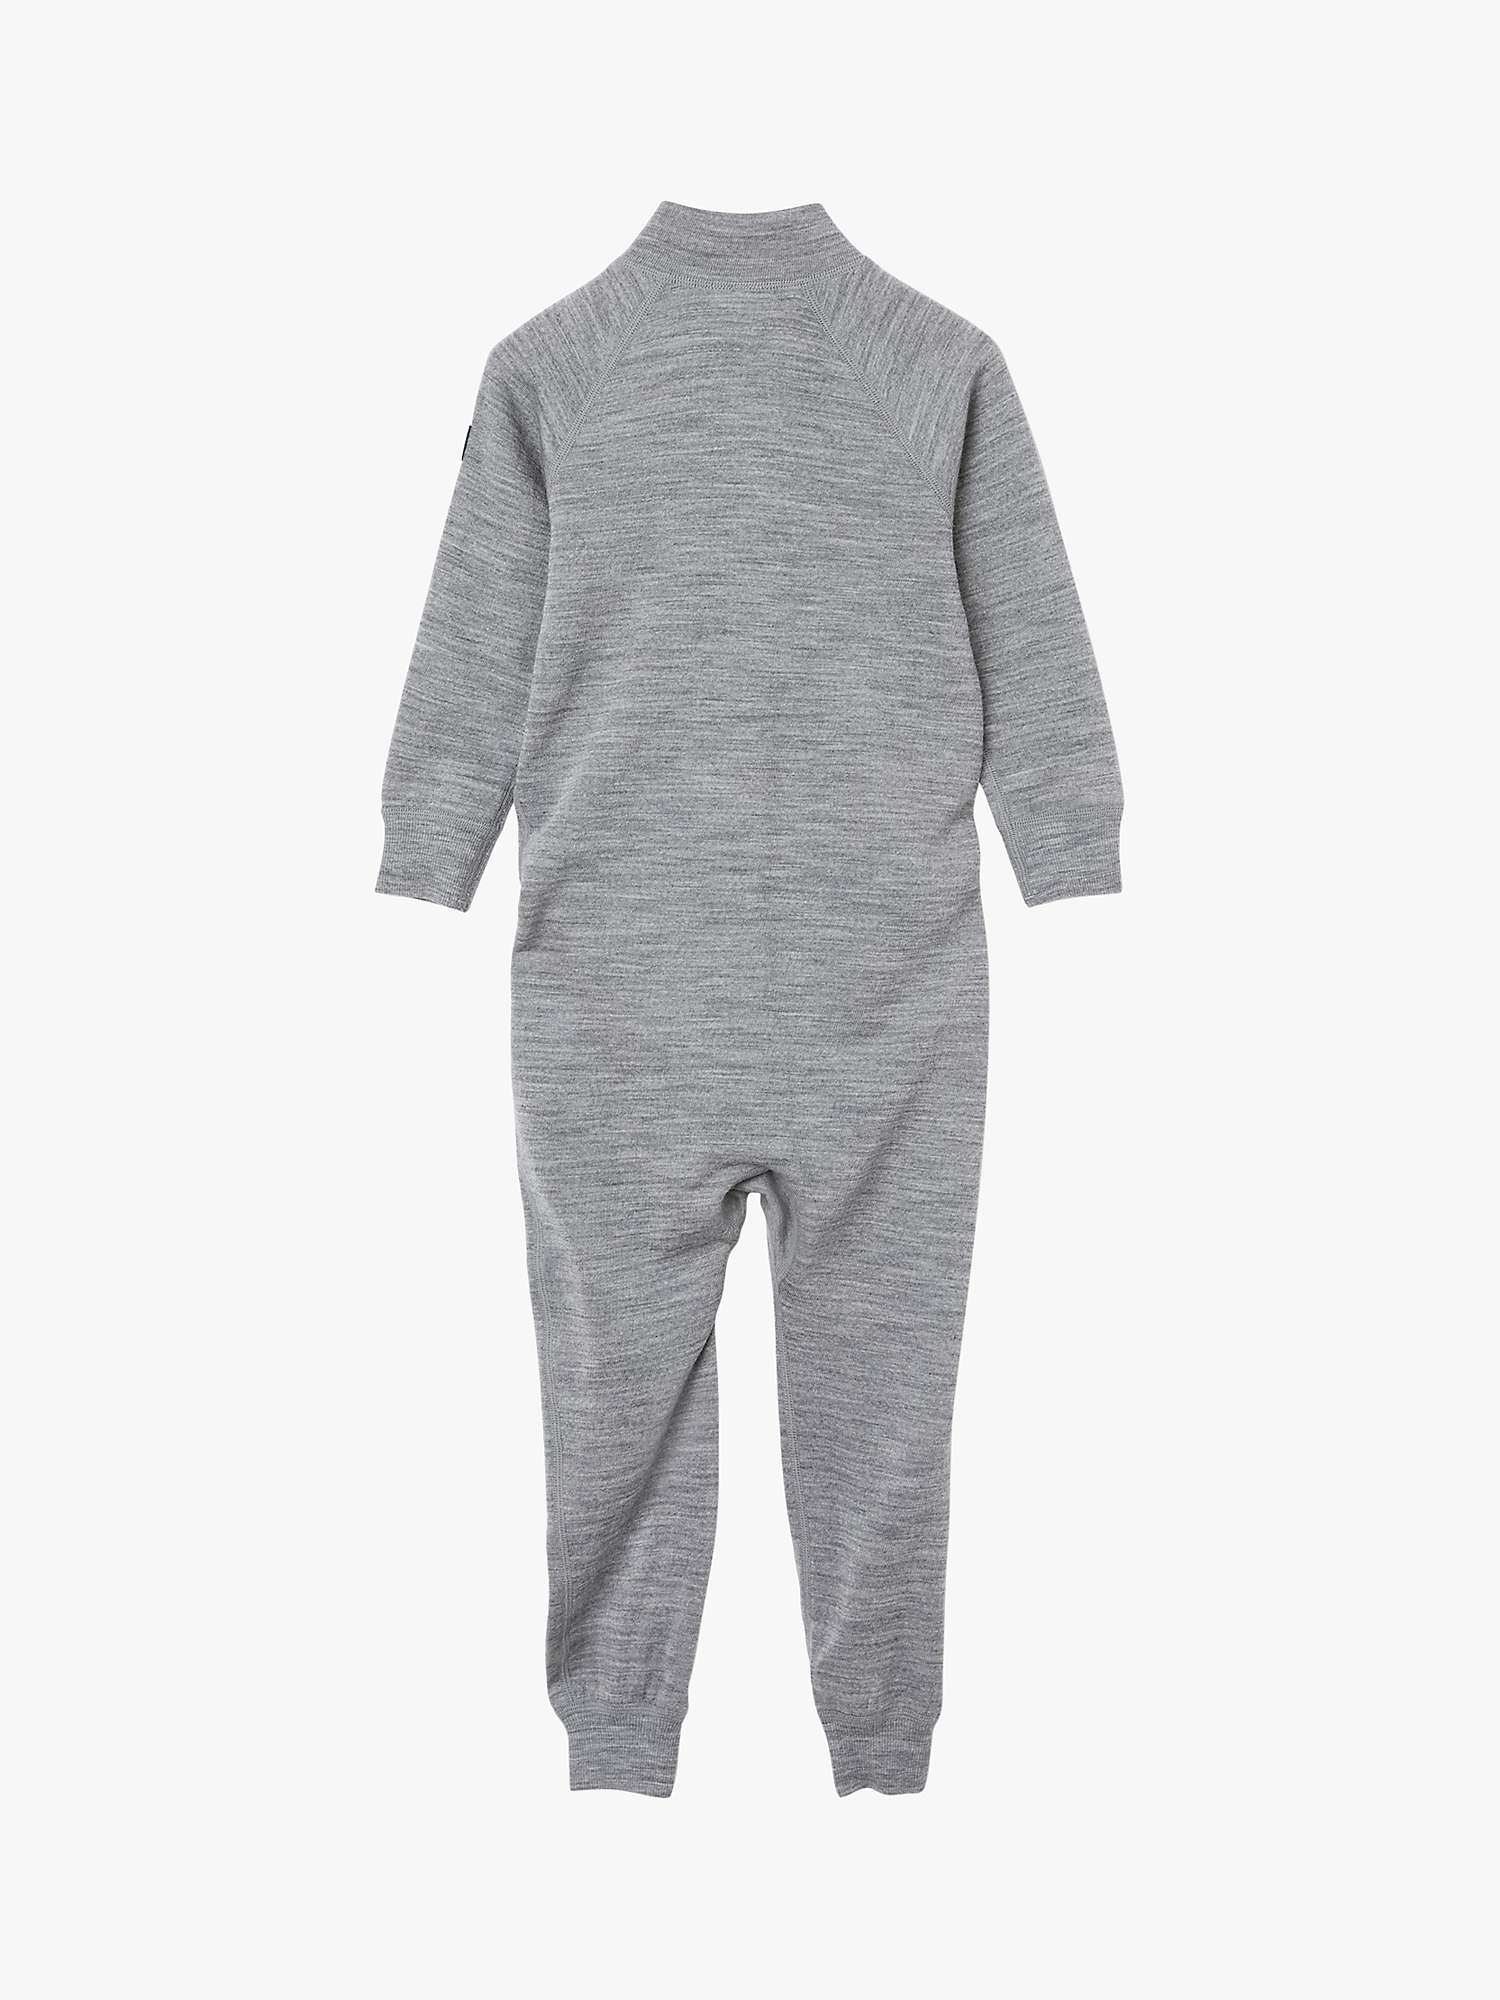 Buy Polarn O. Pyret Baby Merino Wool Terry Overall Romper Online at johnlewis.com